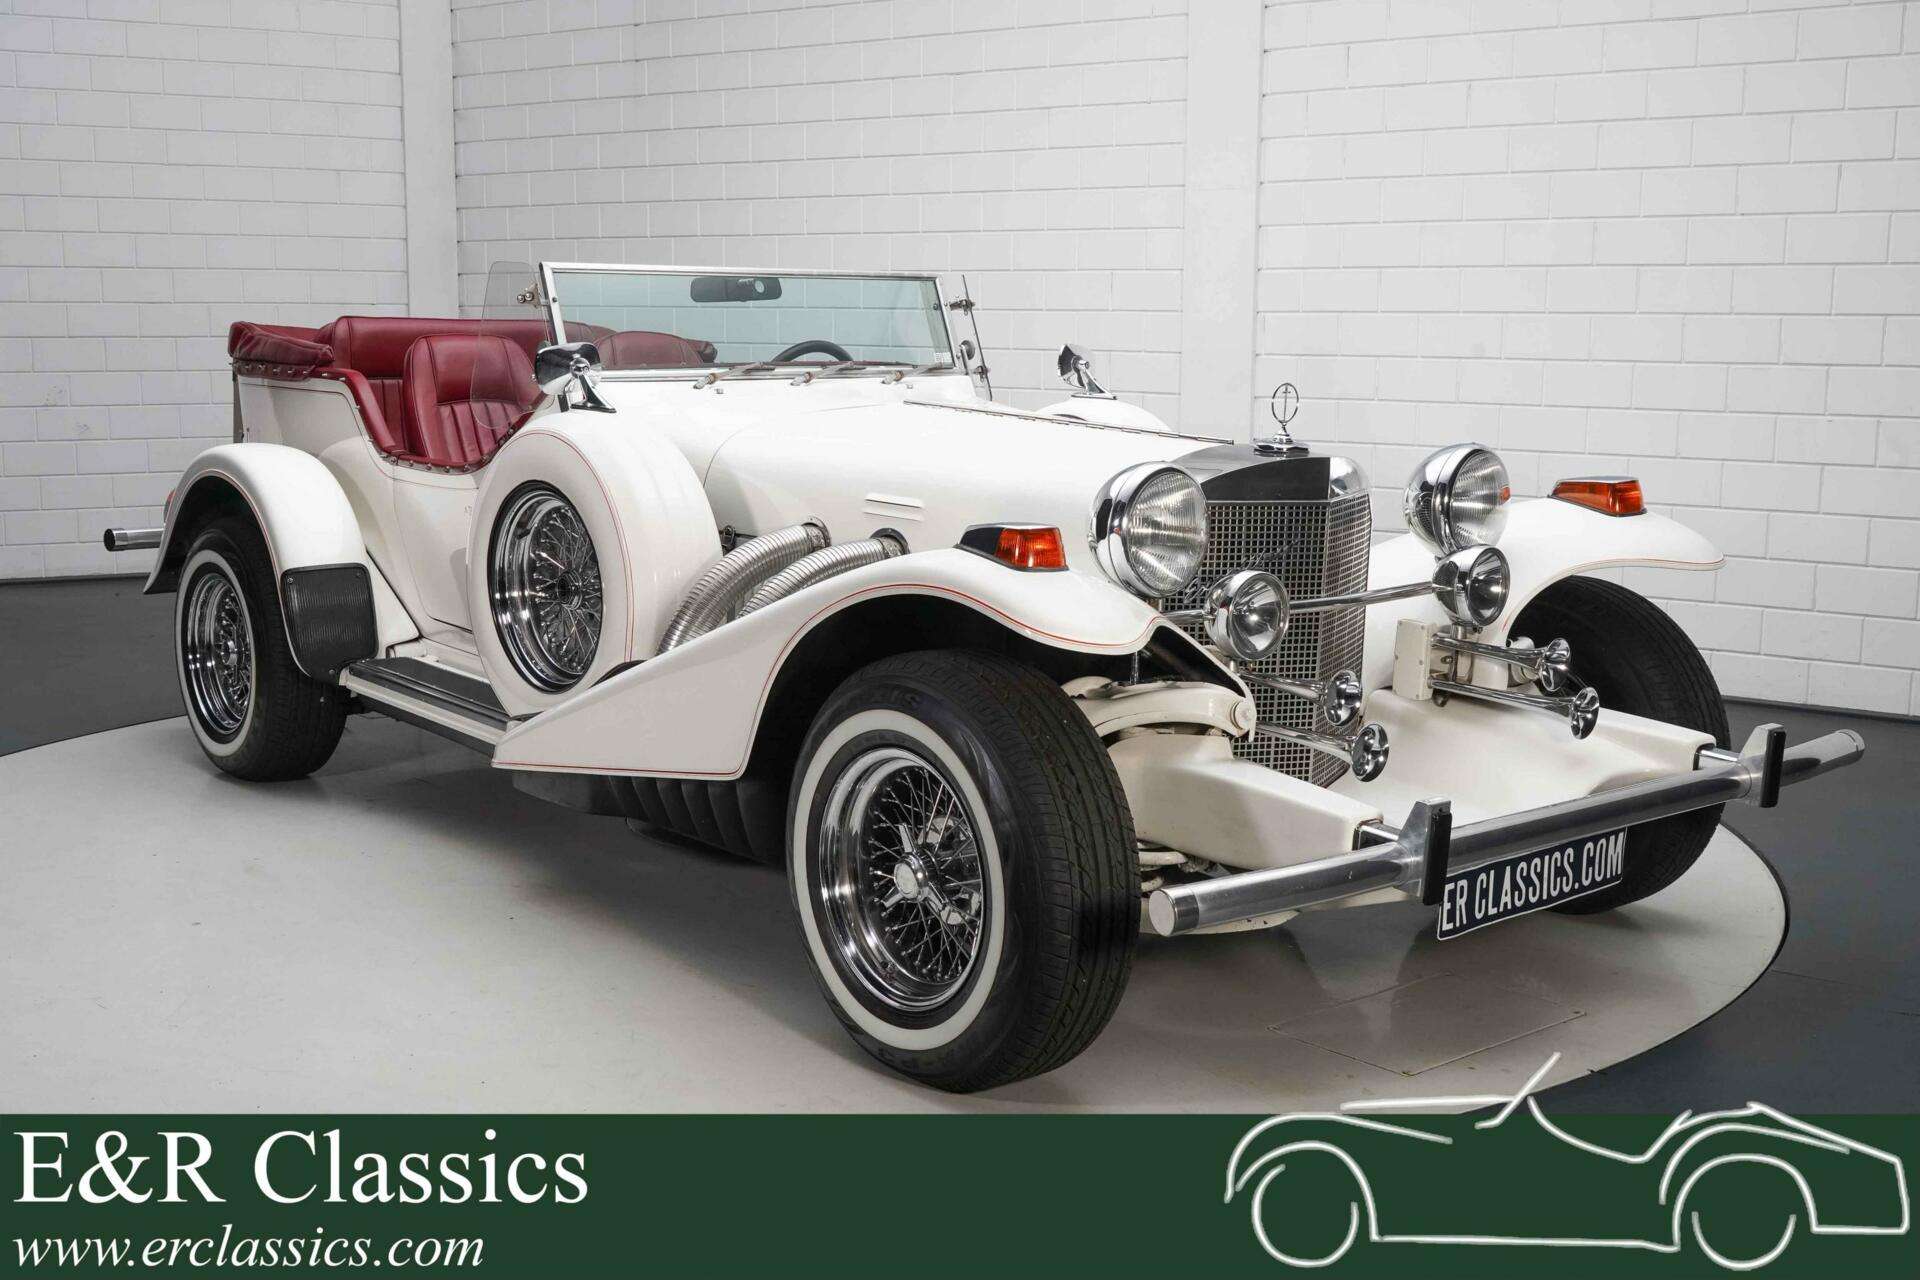 Oldtimer Excalibur Convertible in White antique / classic in WAALWIJK for € 69,950.-